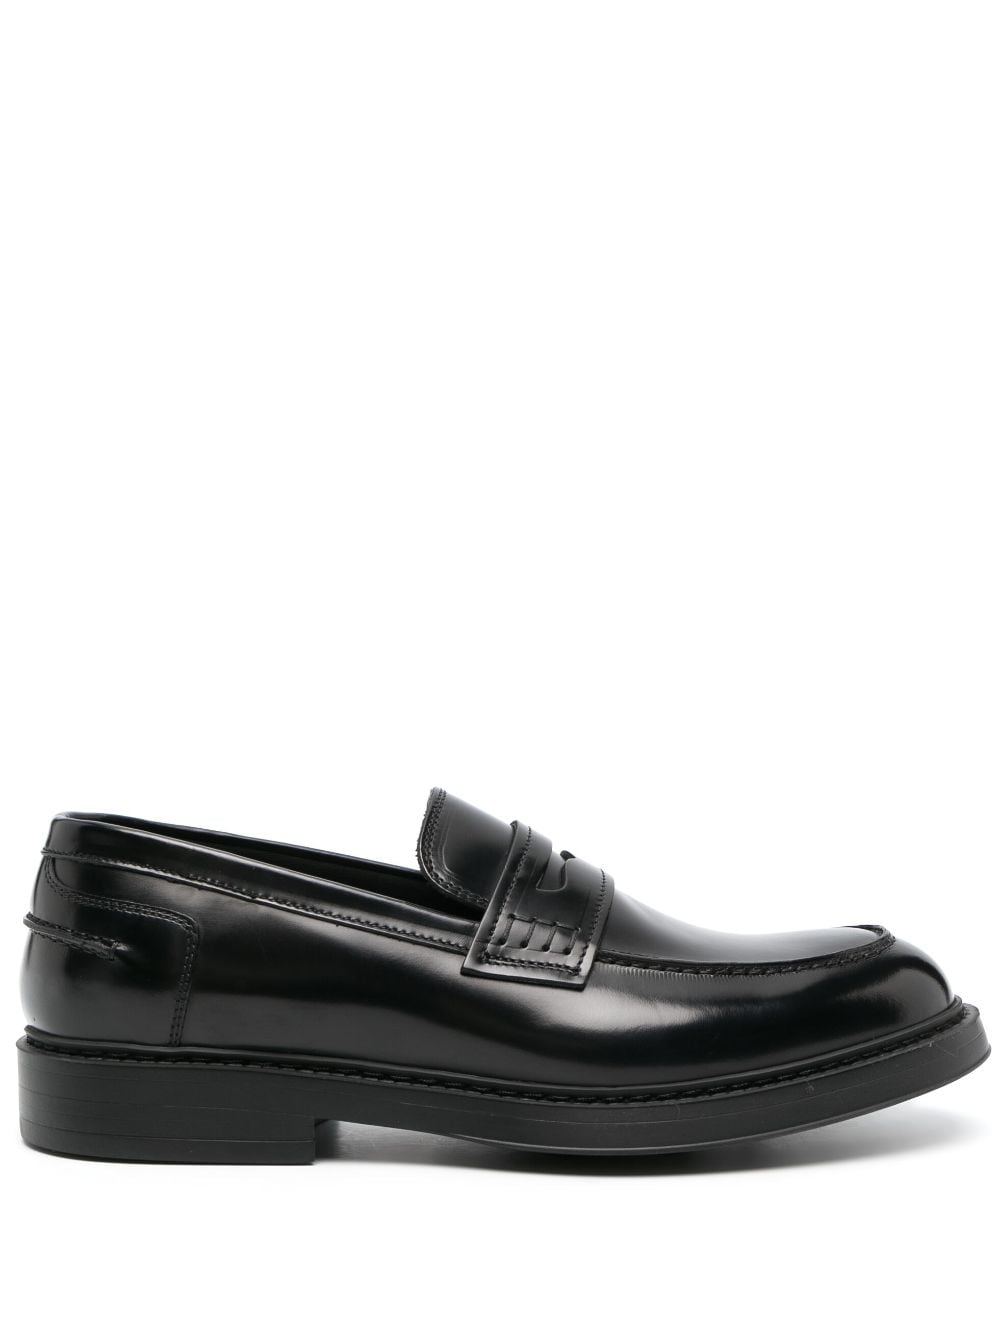 Doucal's round-toe leather loafers - Black von Doucal's